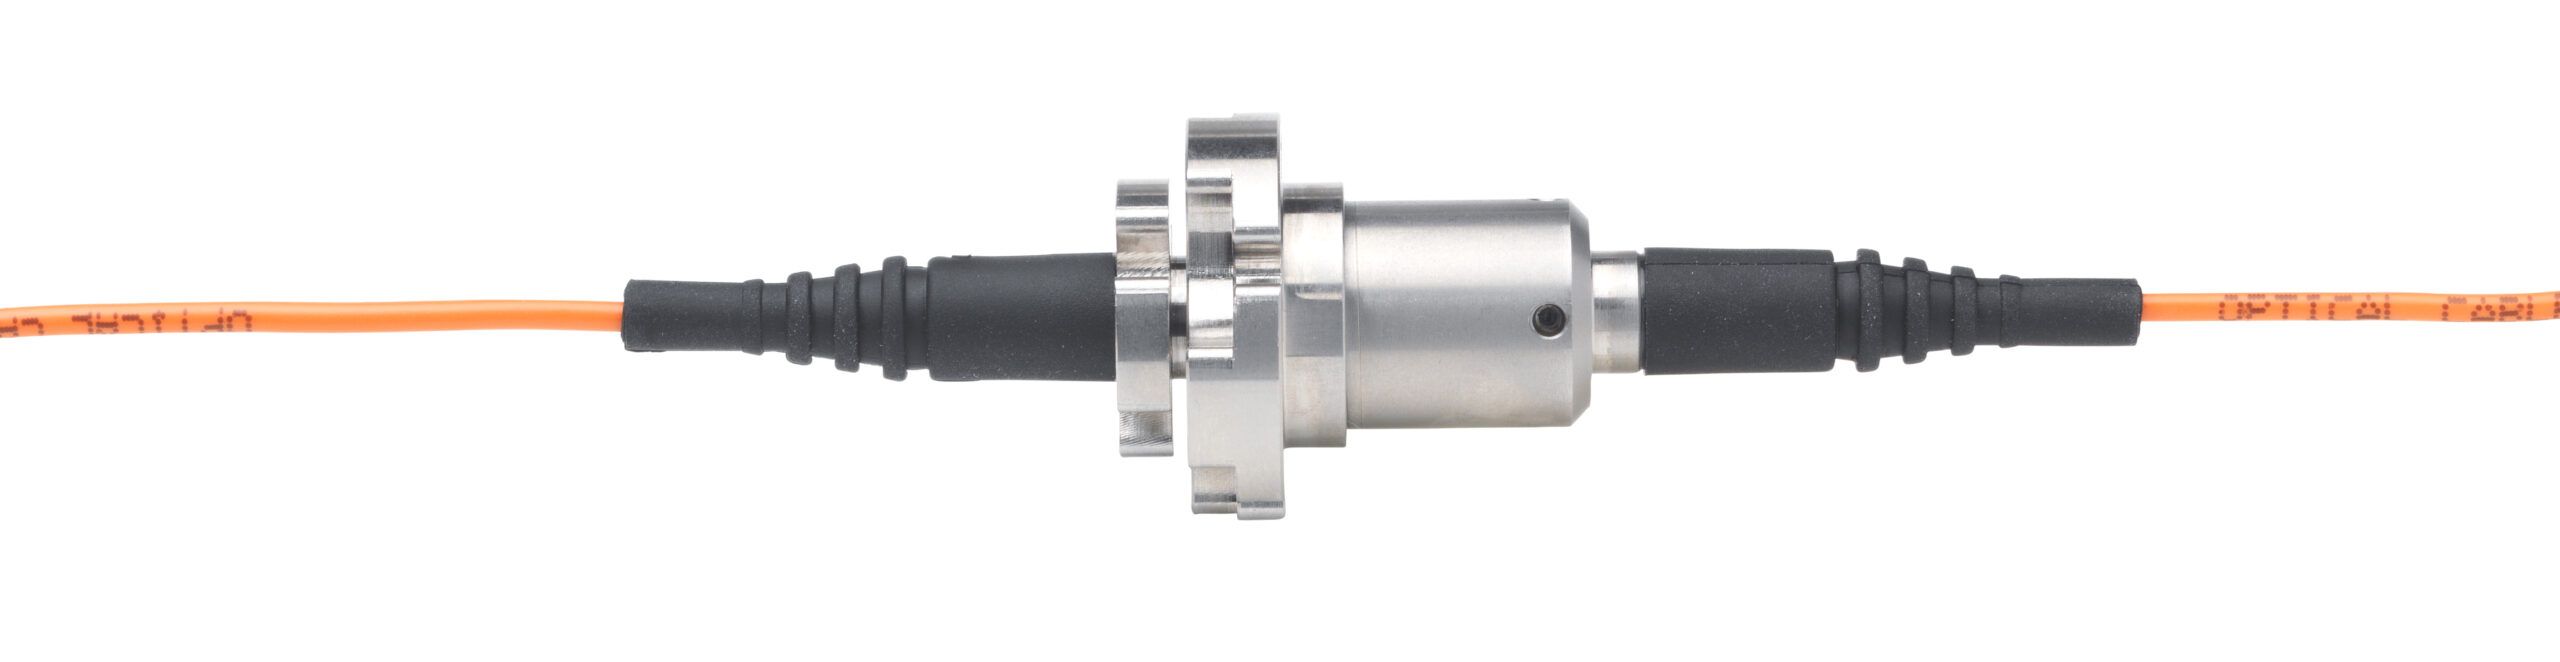 Single Mode Fiber Optic Rotary Joints: A Comprehensive Guide - Grand